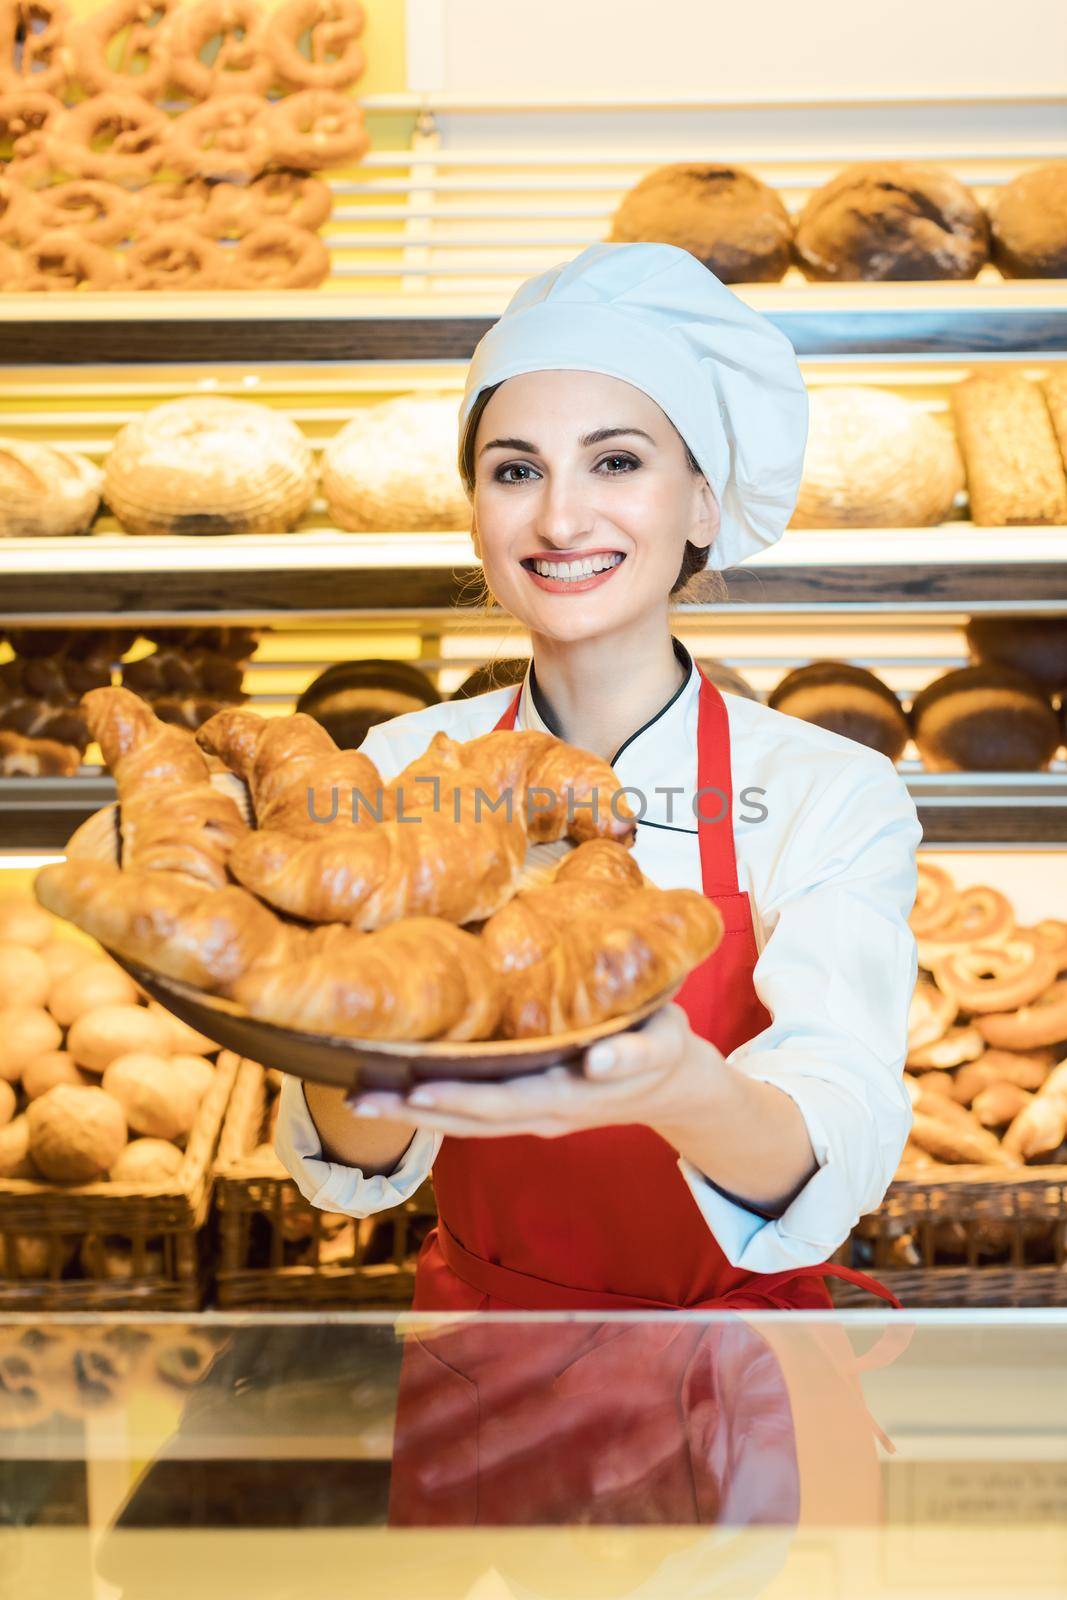 Sales woman offering fresh pastries in a basket